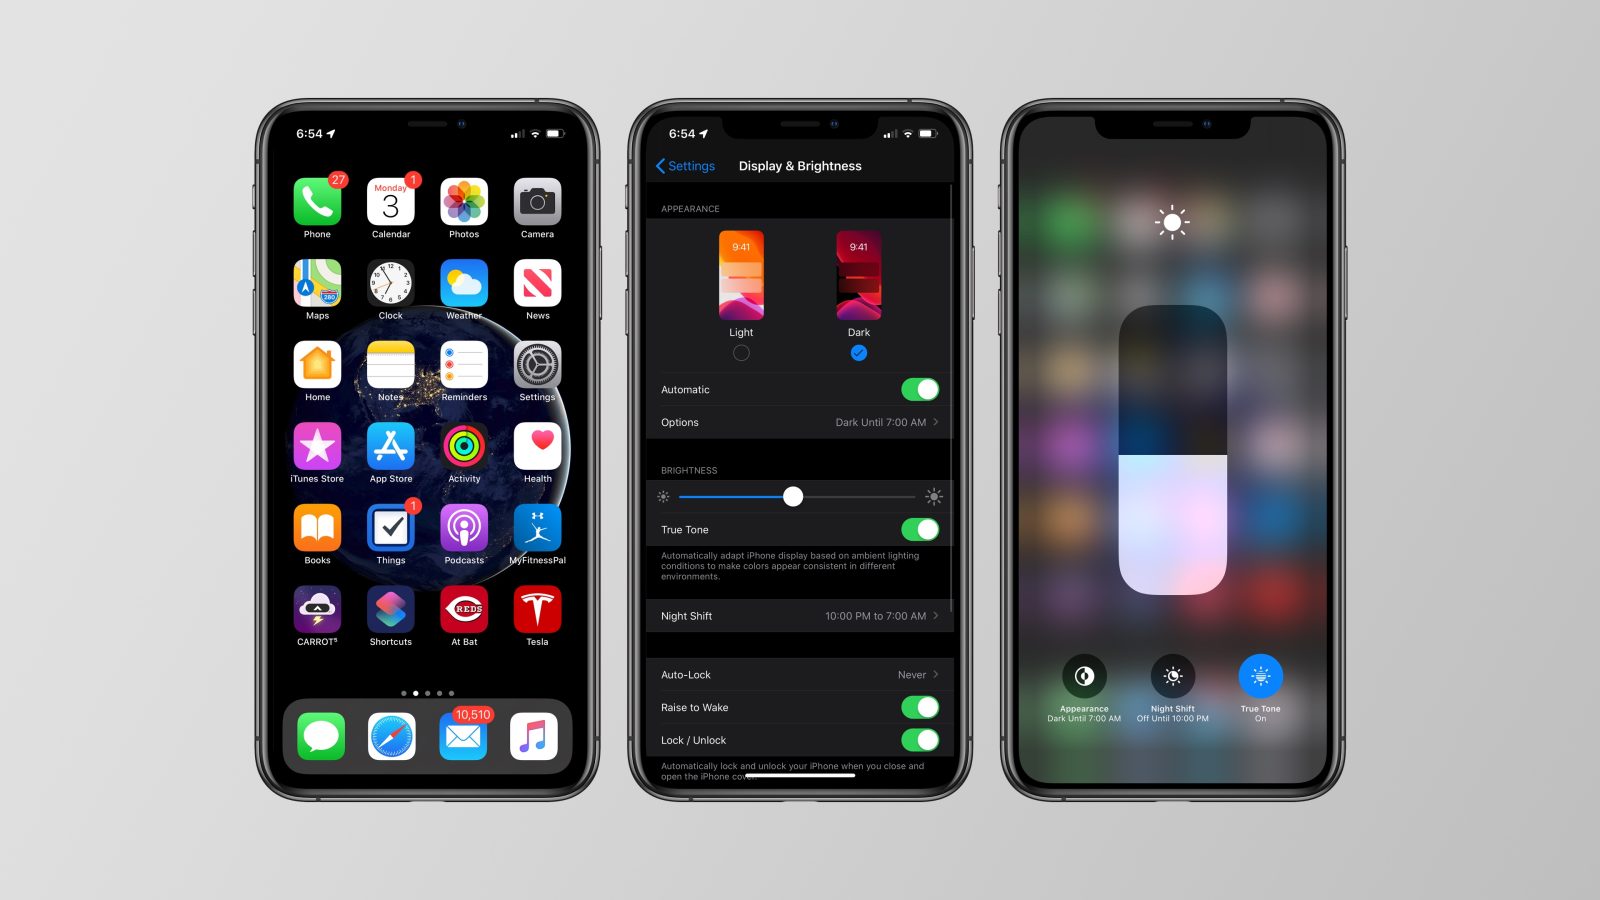 Apple patches iOS 13 again with new, lightweight update